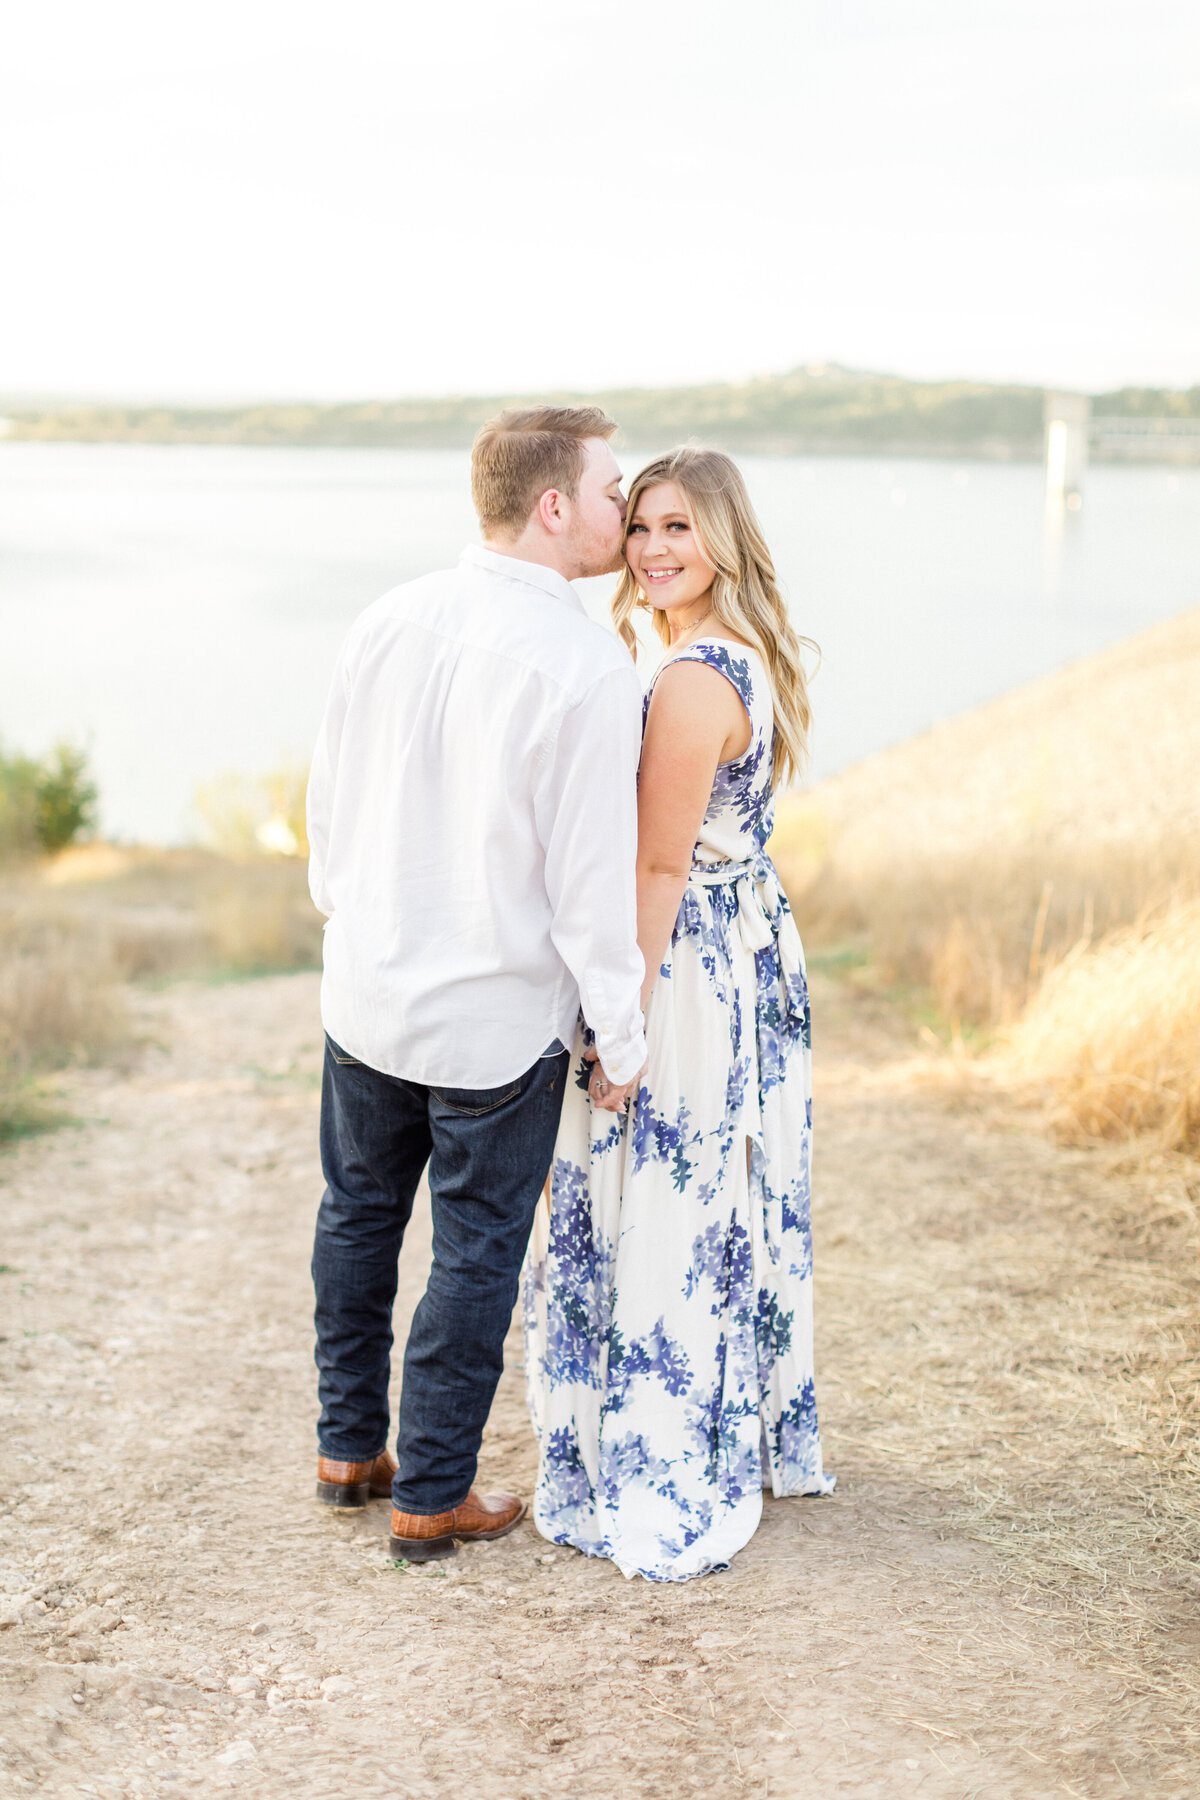 Jessica Chole Photography San Antonio Texas California Wedding Portrait Engagement Maternity Family Lifestyle Photographer Souther Cali TX CA Light Airy Bright Colorful Photography21